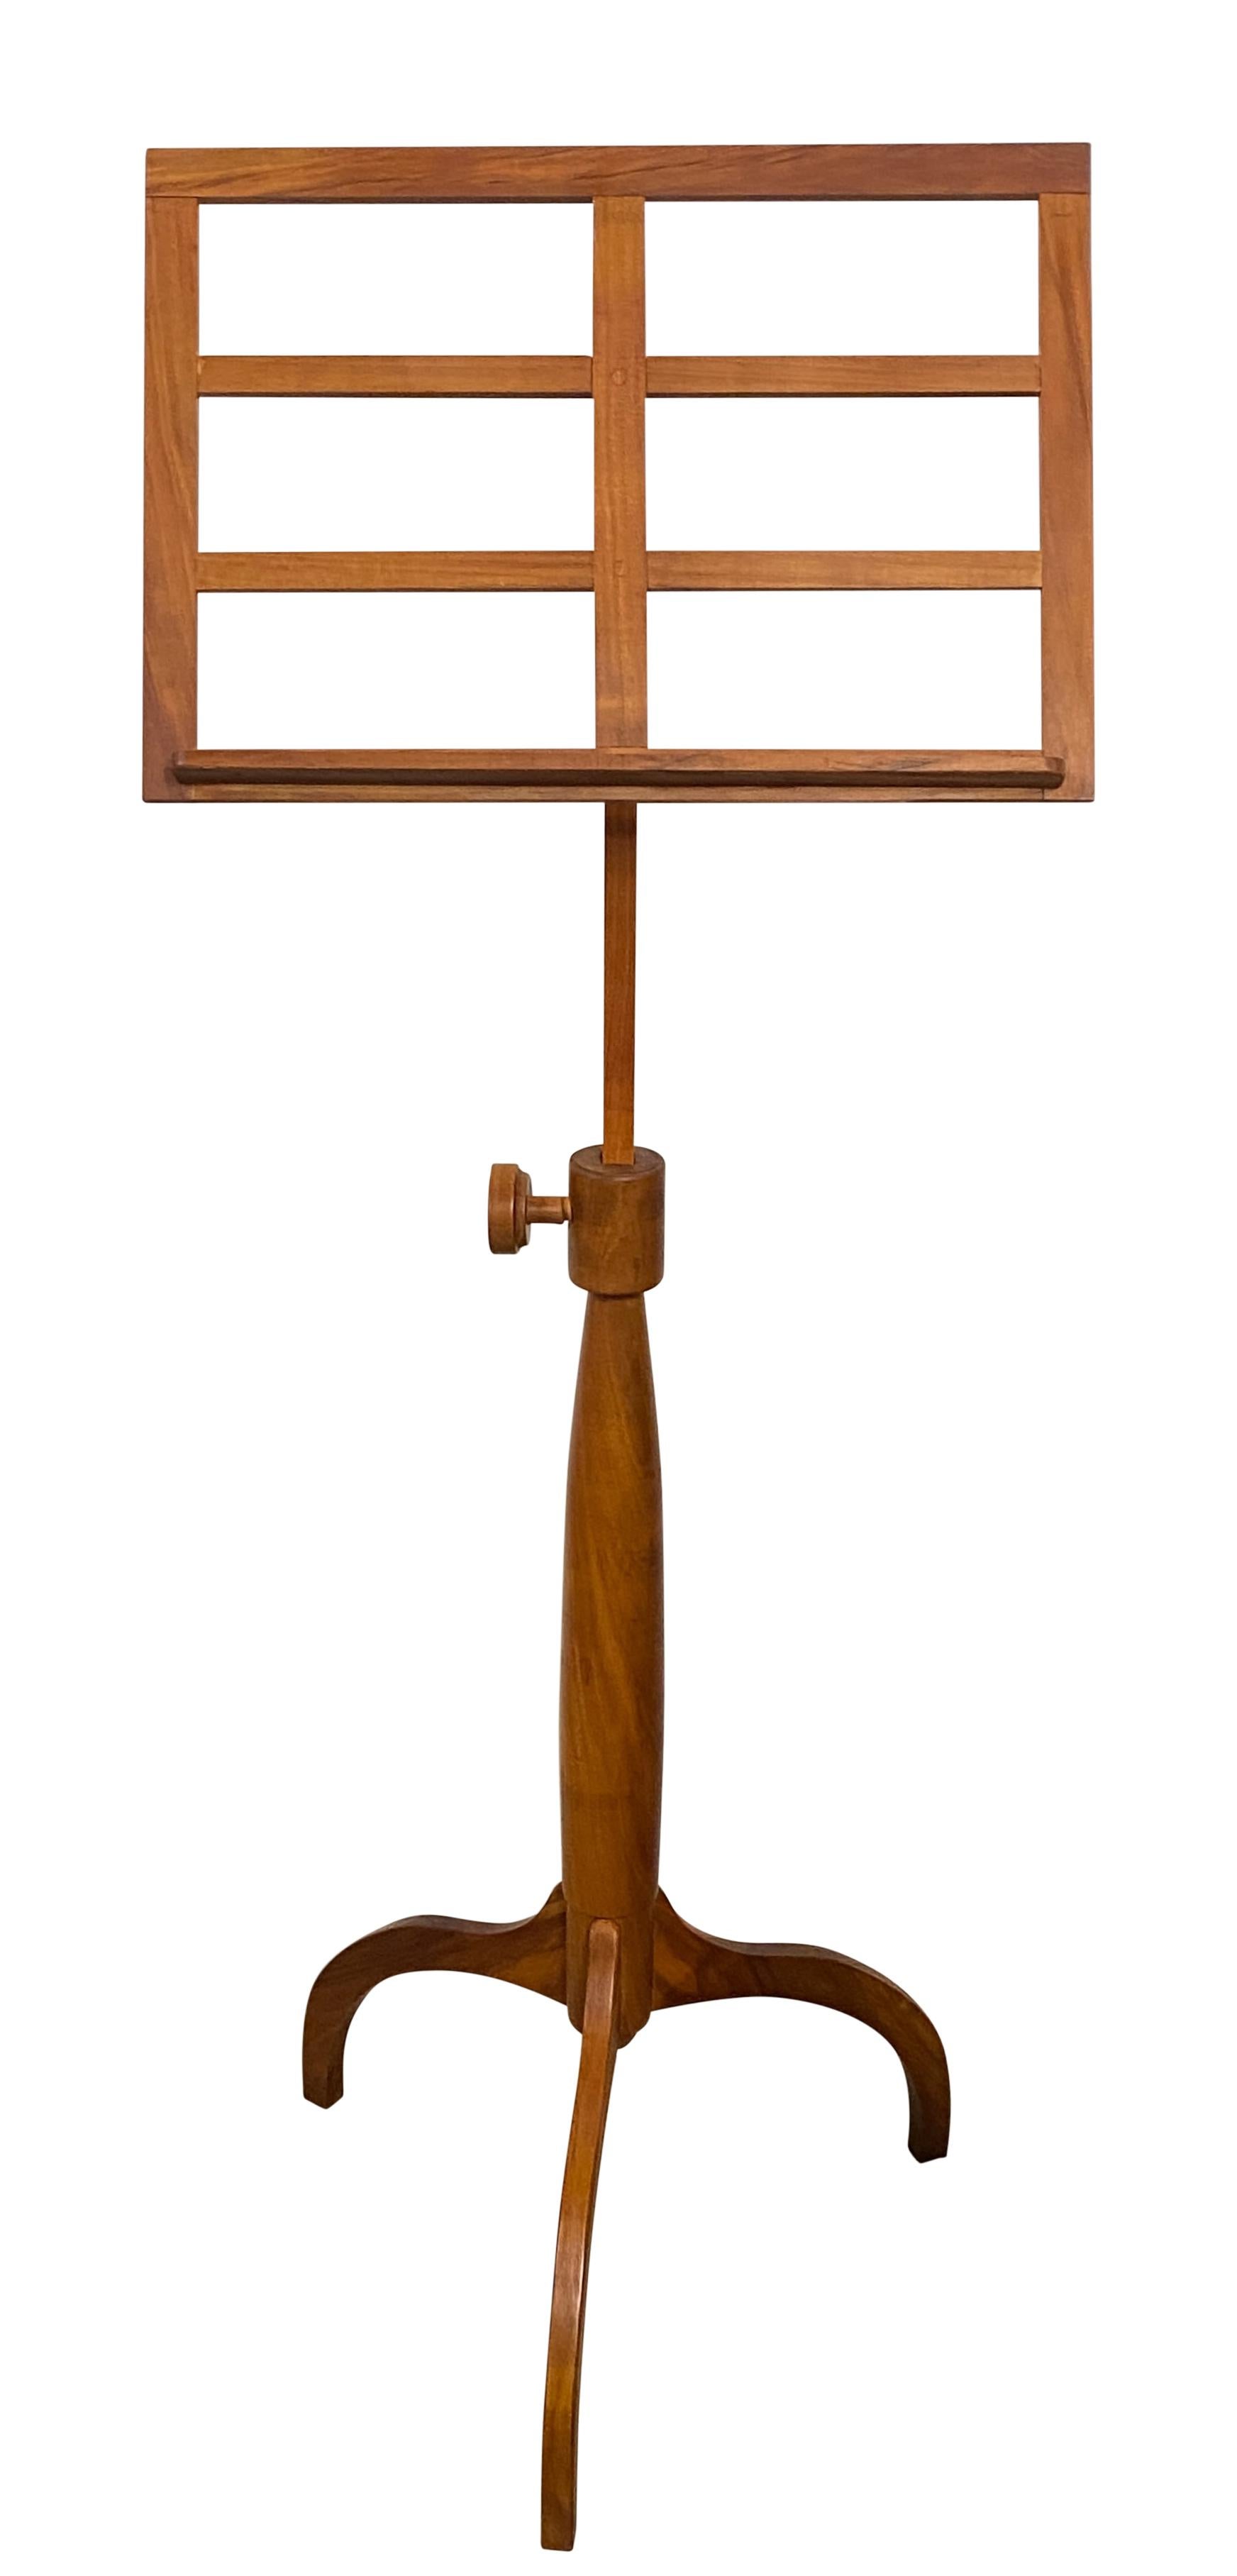 A Shaker Work Shop style solid cherry wood hand crafted (bench made) music stand. Clean elegant lines, perfect in a modern style home.
Adjustable height from 42 inches to 58 inches.
American, mid to late 20th century.